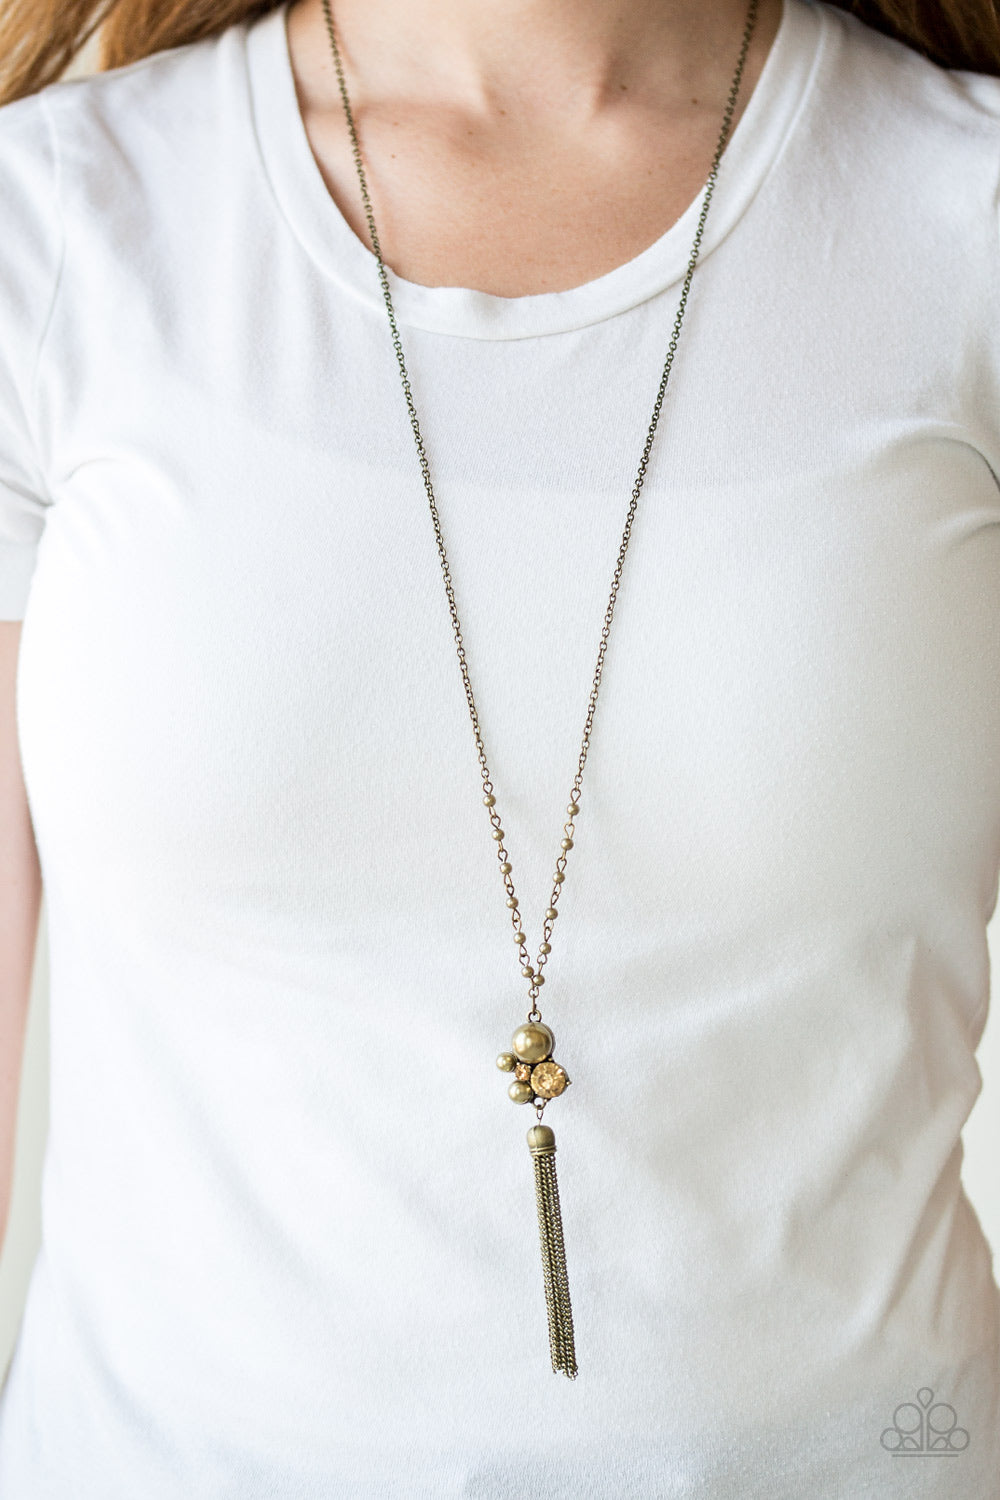 Uniquely Uptown Necklace (Brass, Gold, White)